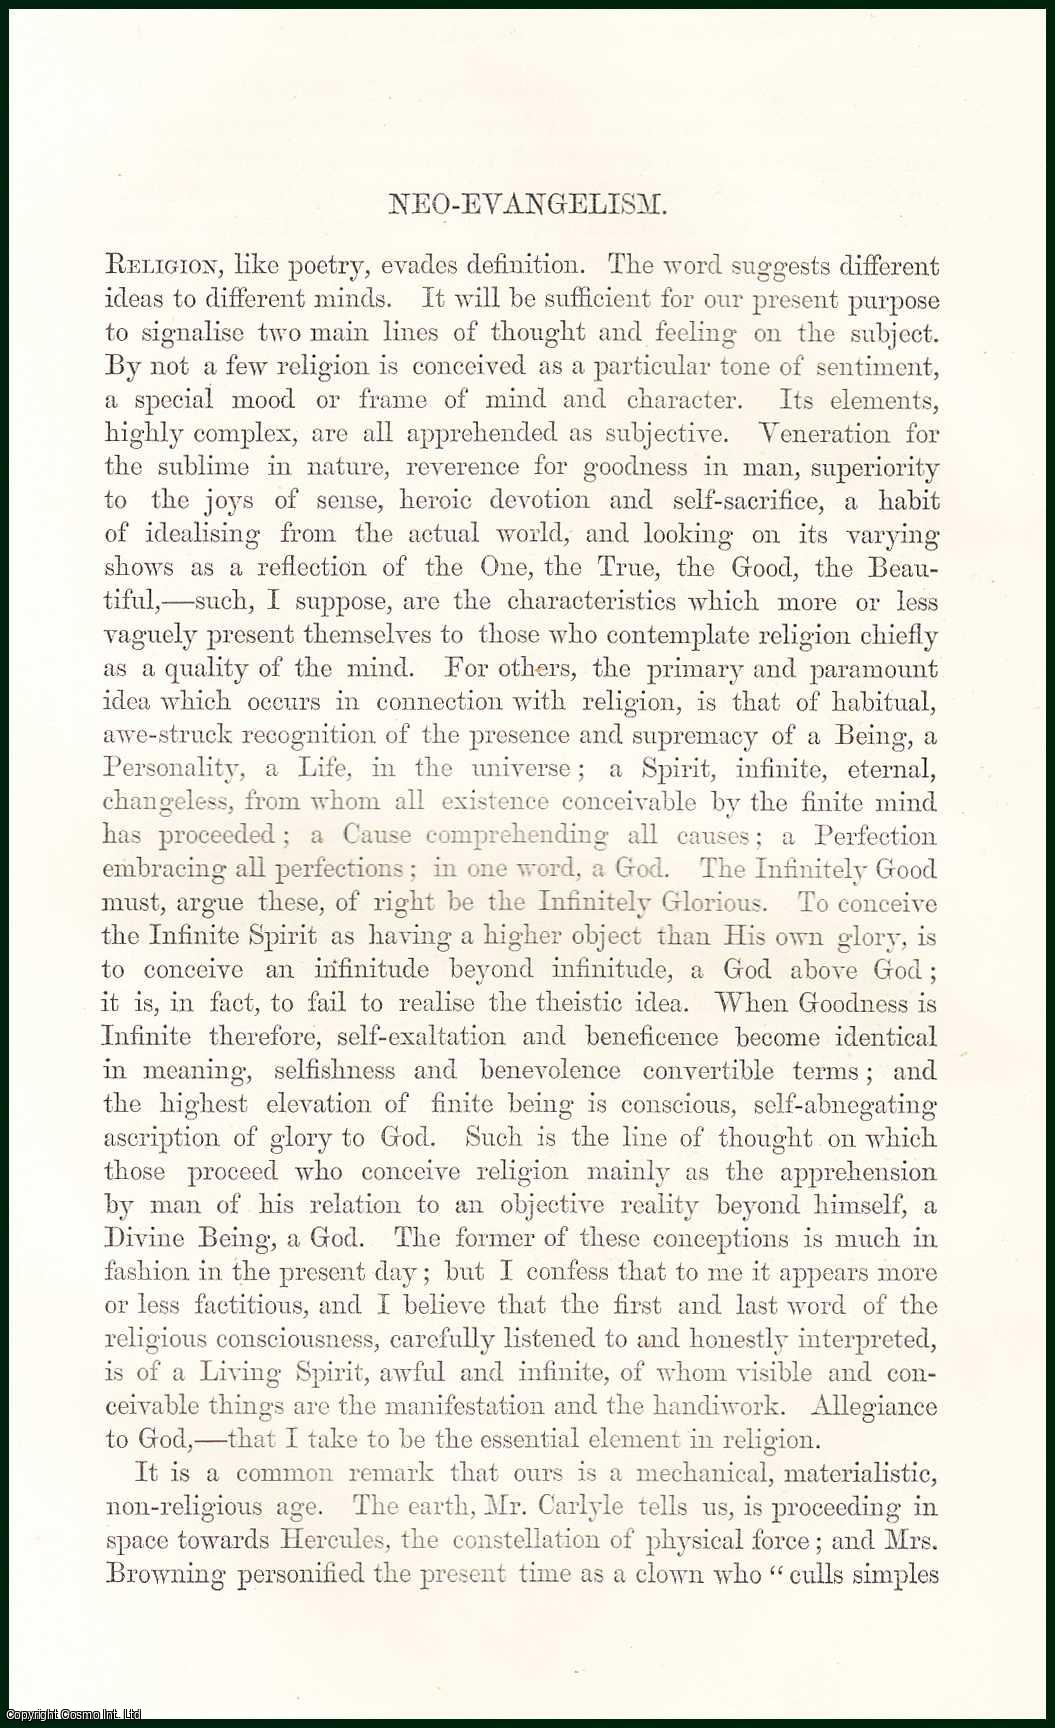 Peter Bayne - Neo-Evangelism : Religion, like Poetry, evades definition. An uncommon original article from The Fortnightly Review, 1865.